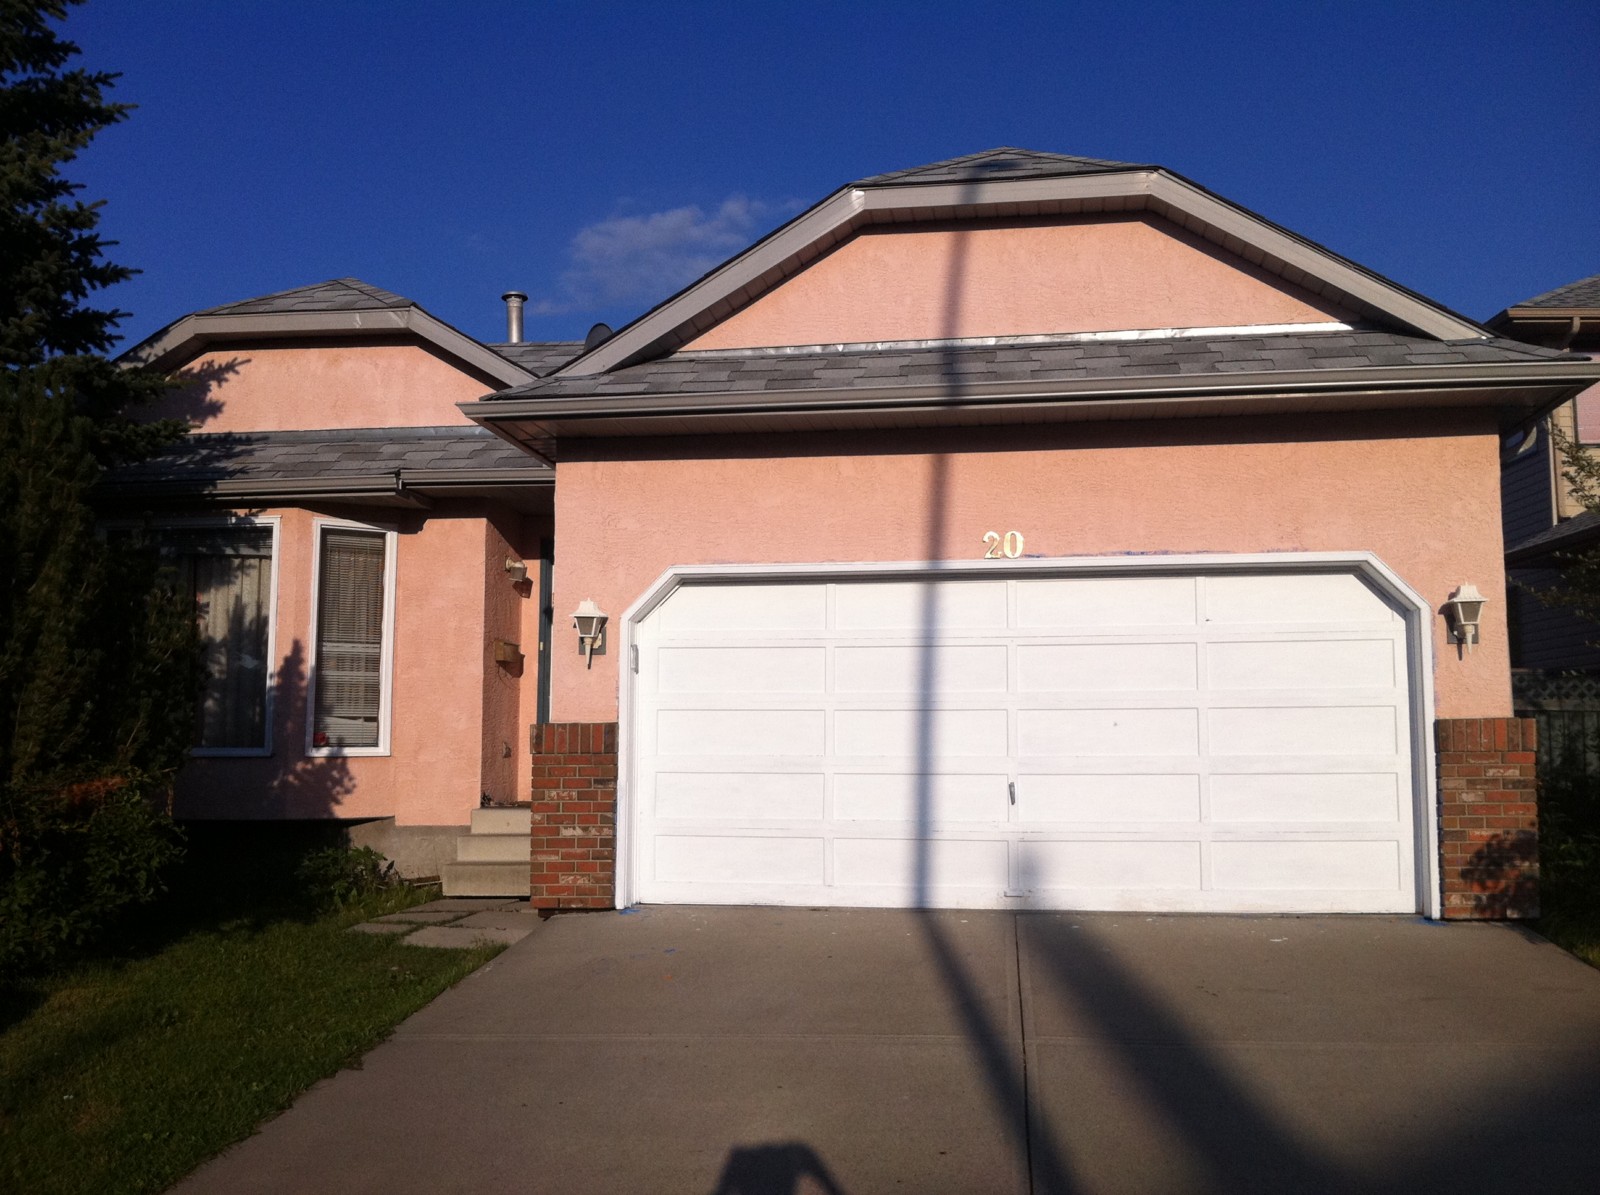 Fresh paint, renovated! double garage single family home in Sandstone!